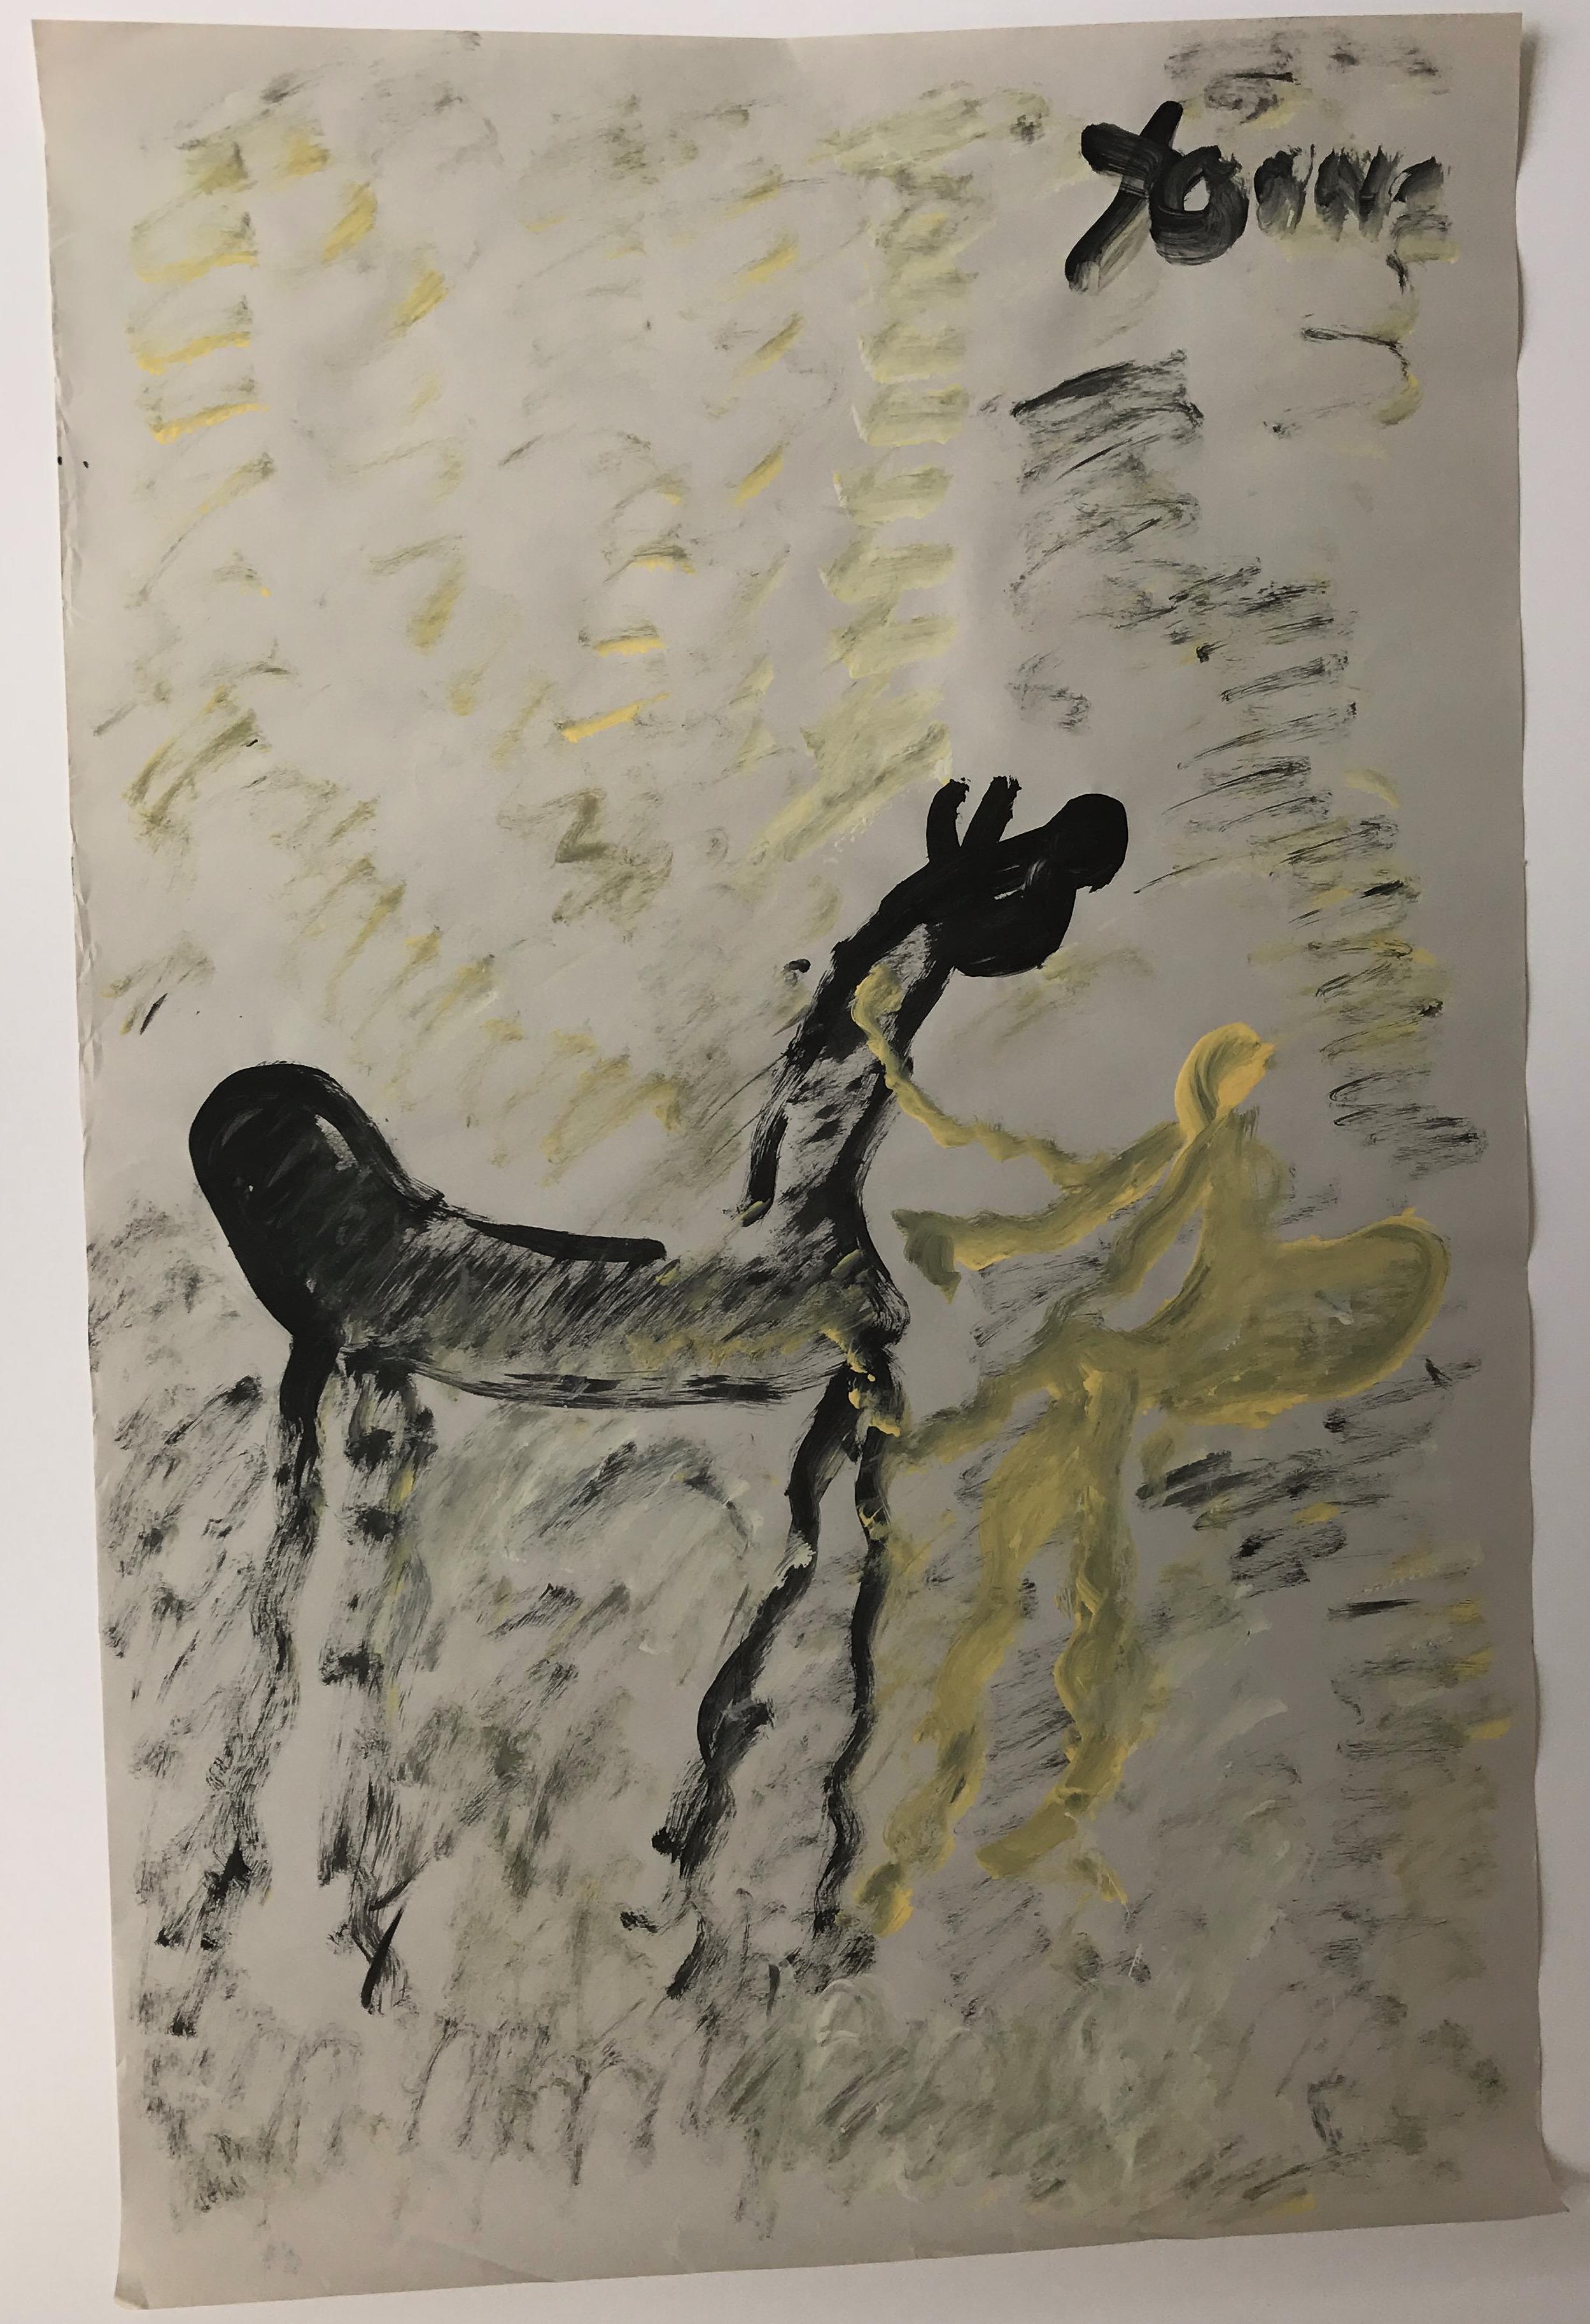 Acrylic on newsprint of a horse and pregnant woman by Purvis Young. Signed 'Young.'

From the artist to Vanity Novelty Garden, Tamara Hendershot To Rising Fawn Folk Art, The Jimmy Hedges Collection of Outsider Art. 